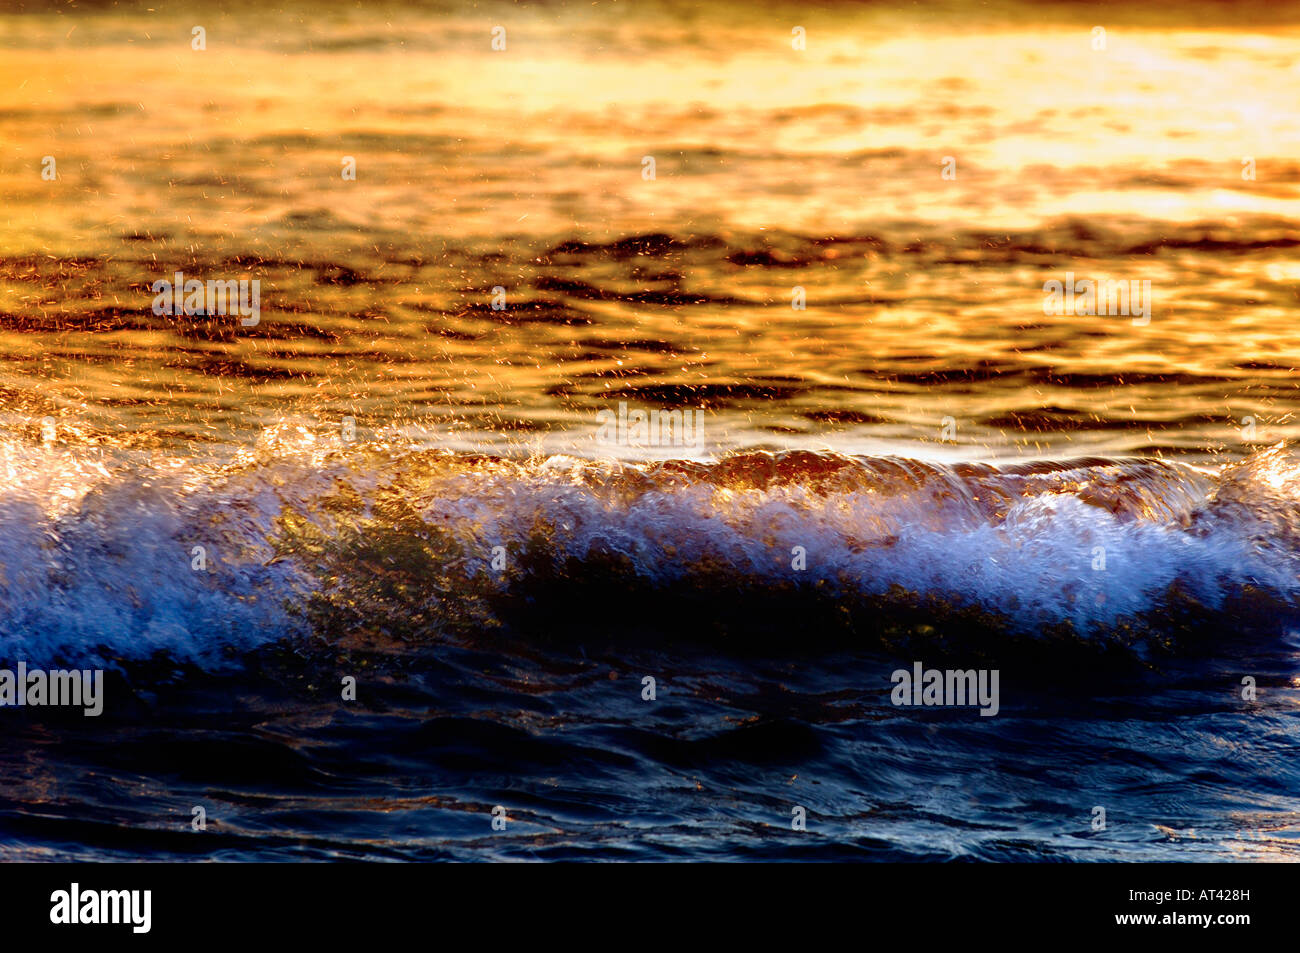 Sunset Evening over Delray Public Beach Florida with a burst of golden sunshine reflecting over ocean waves. Highway A1A N Ocean Blvd. Biodiverse ecological beaches and oceans. Stock Photo